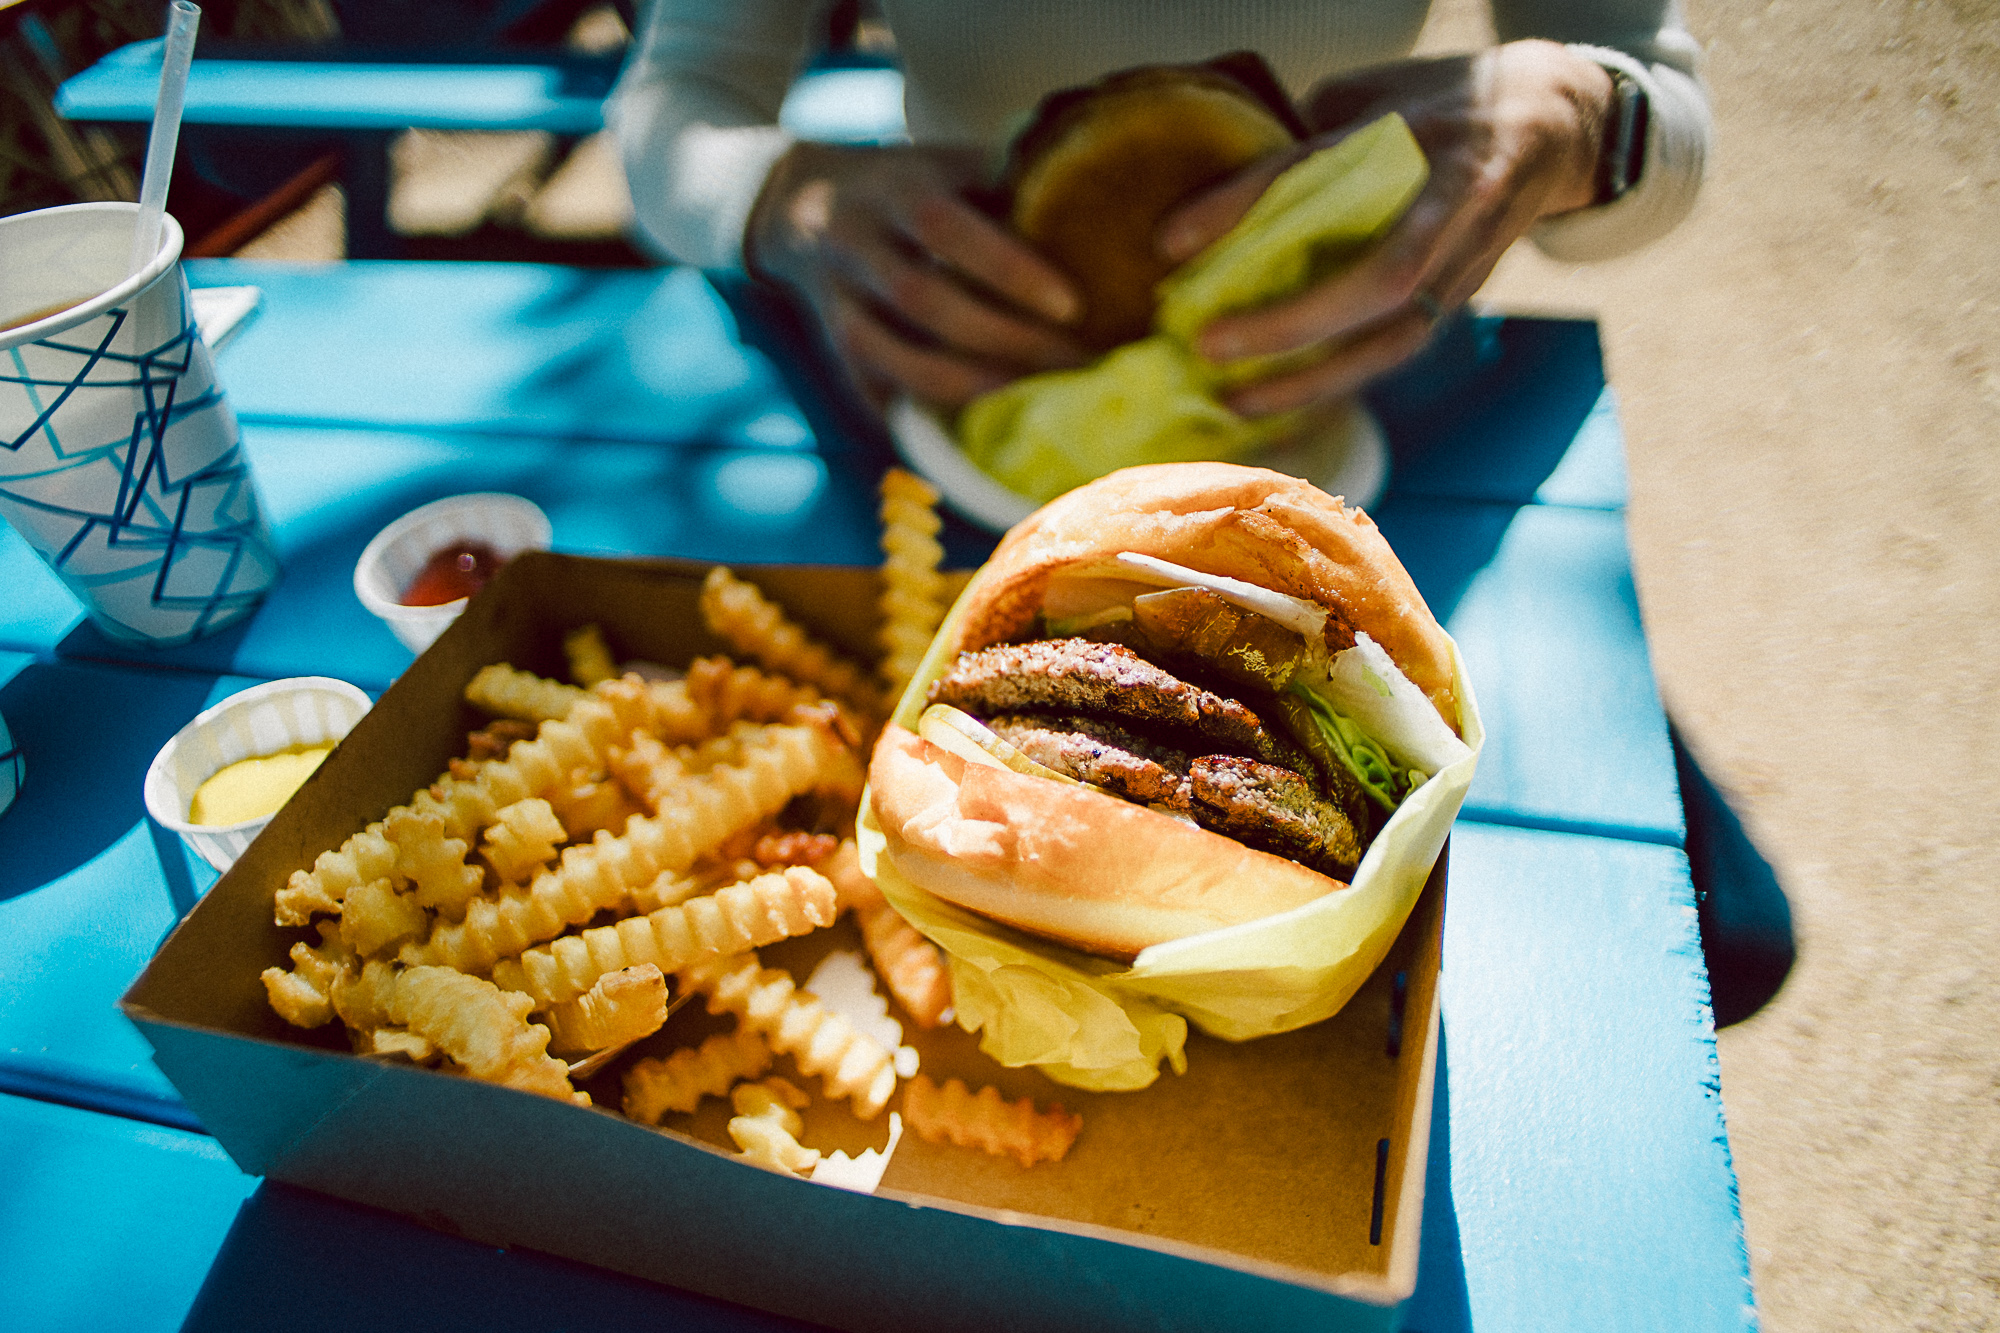 A burger in a paper wrap and fries in a tray on a blue picnic table.